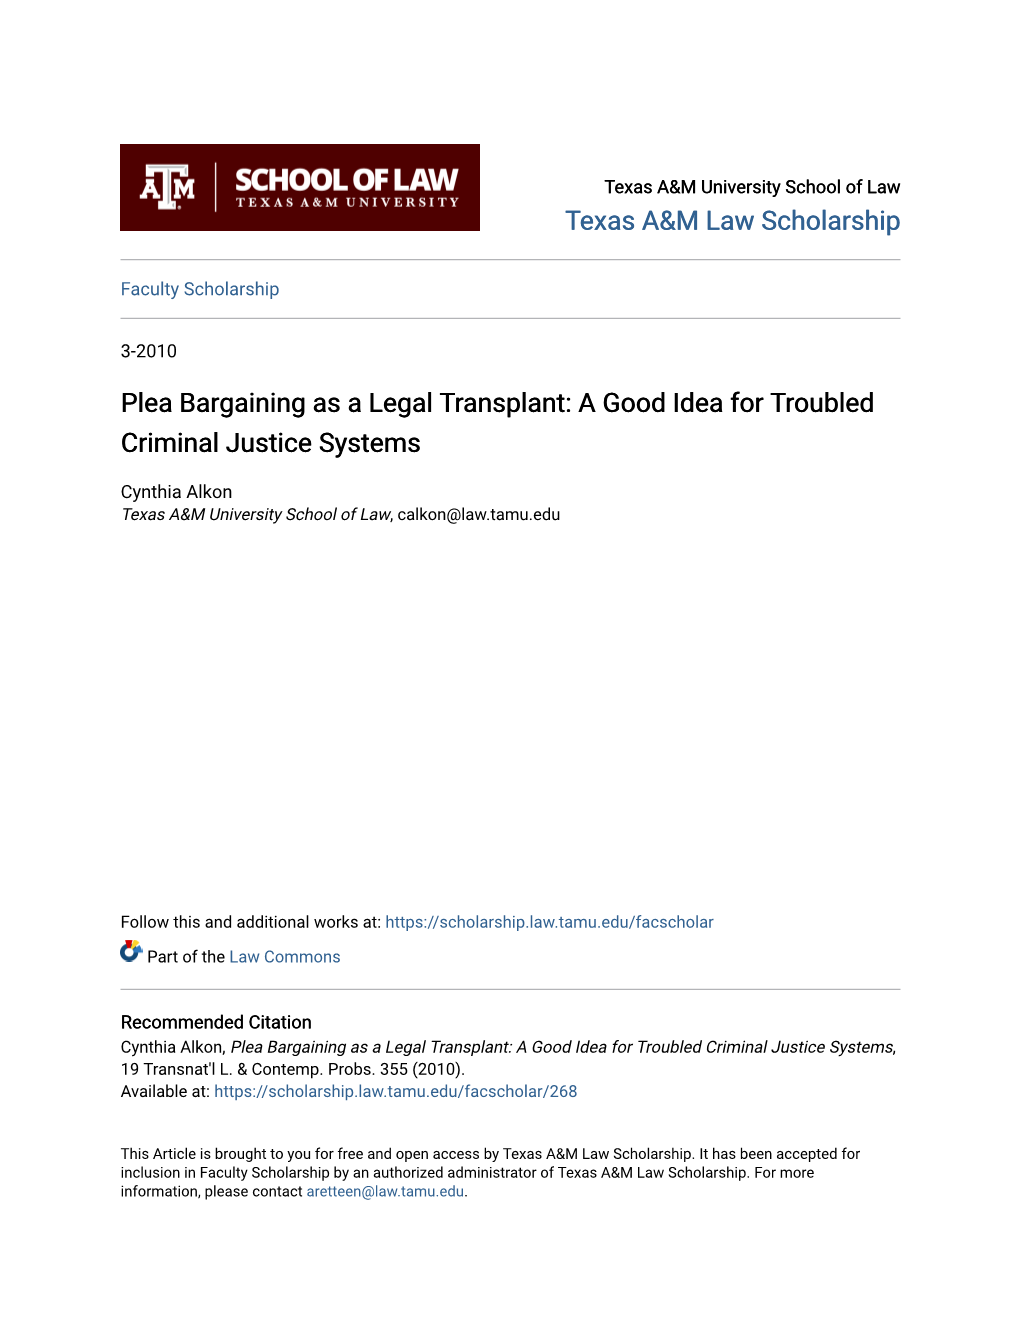 Plea Bargaining As a Legal Transplant: a Good Idea for Troubled Criminal Justice Systems